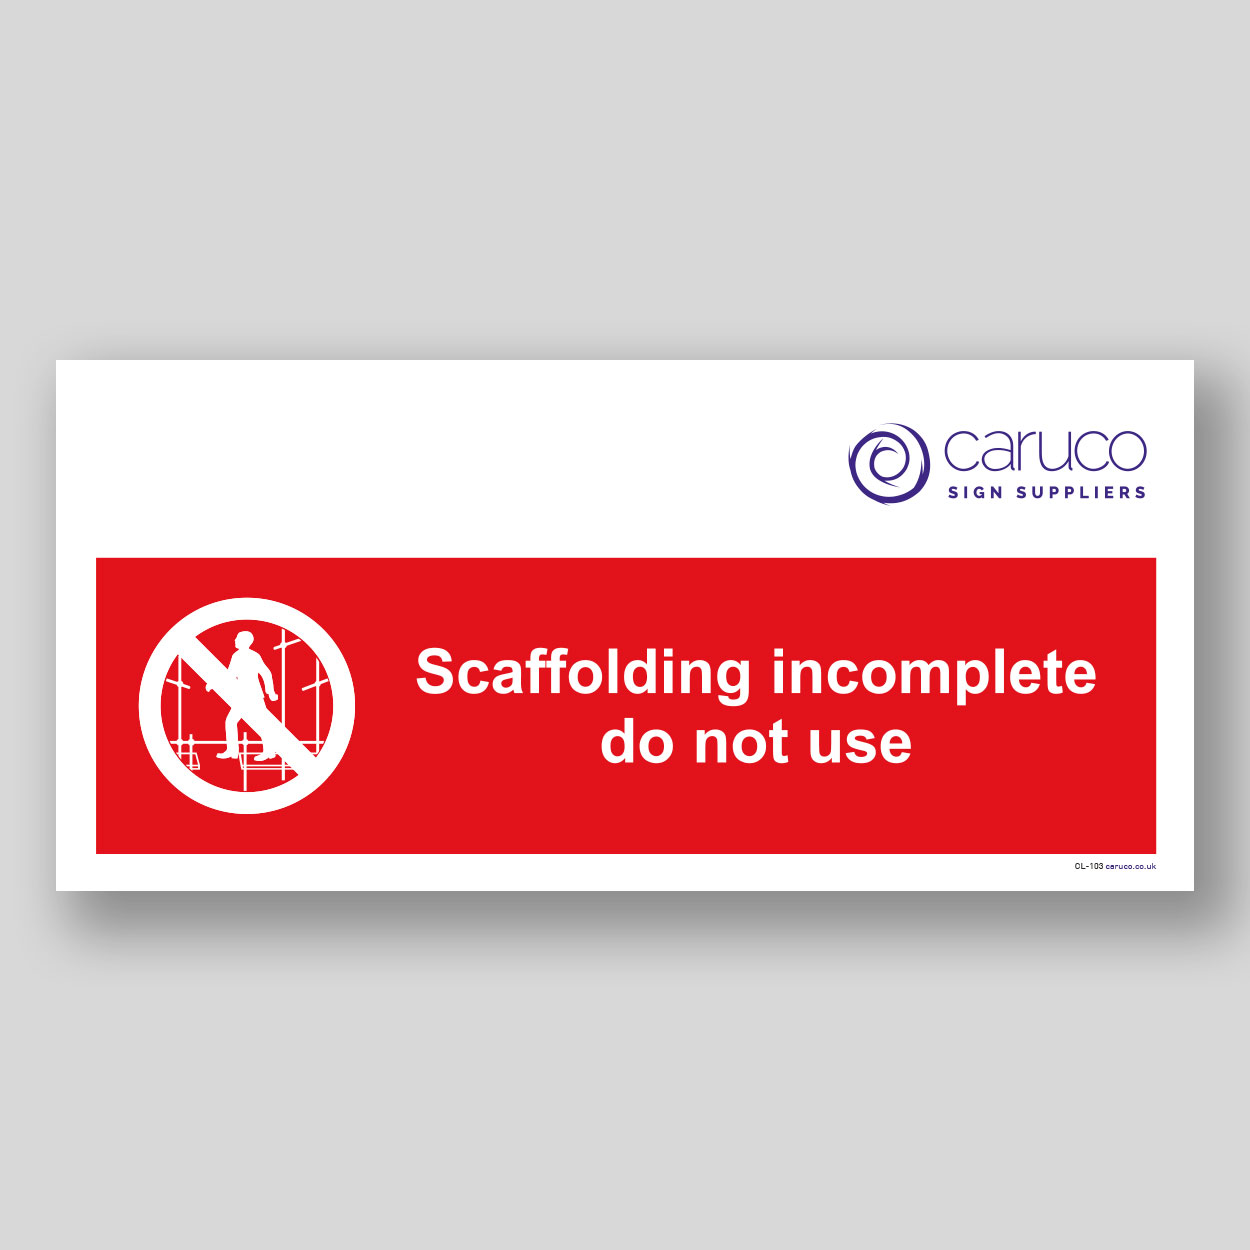 CL-103 Scaffold incomplete do not use